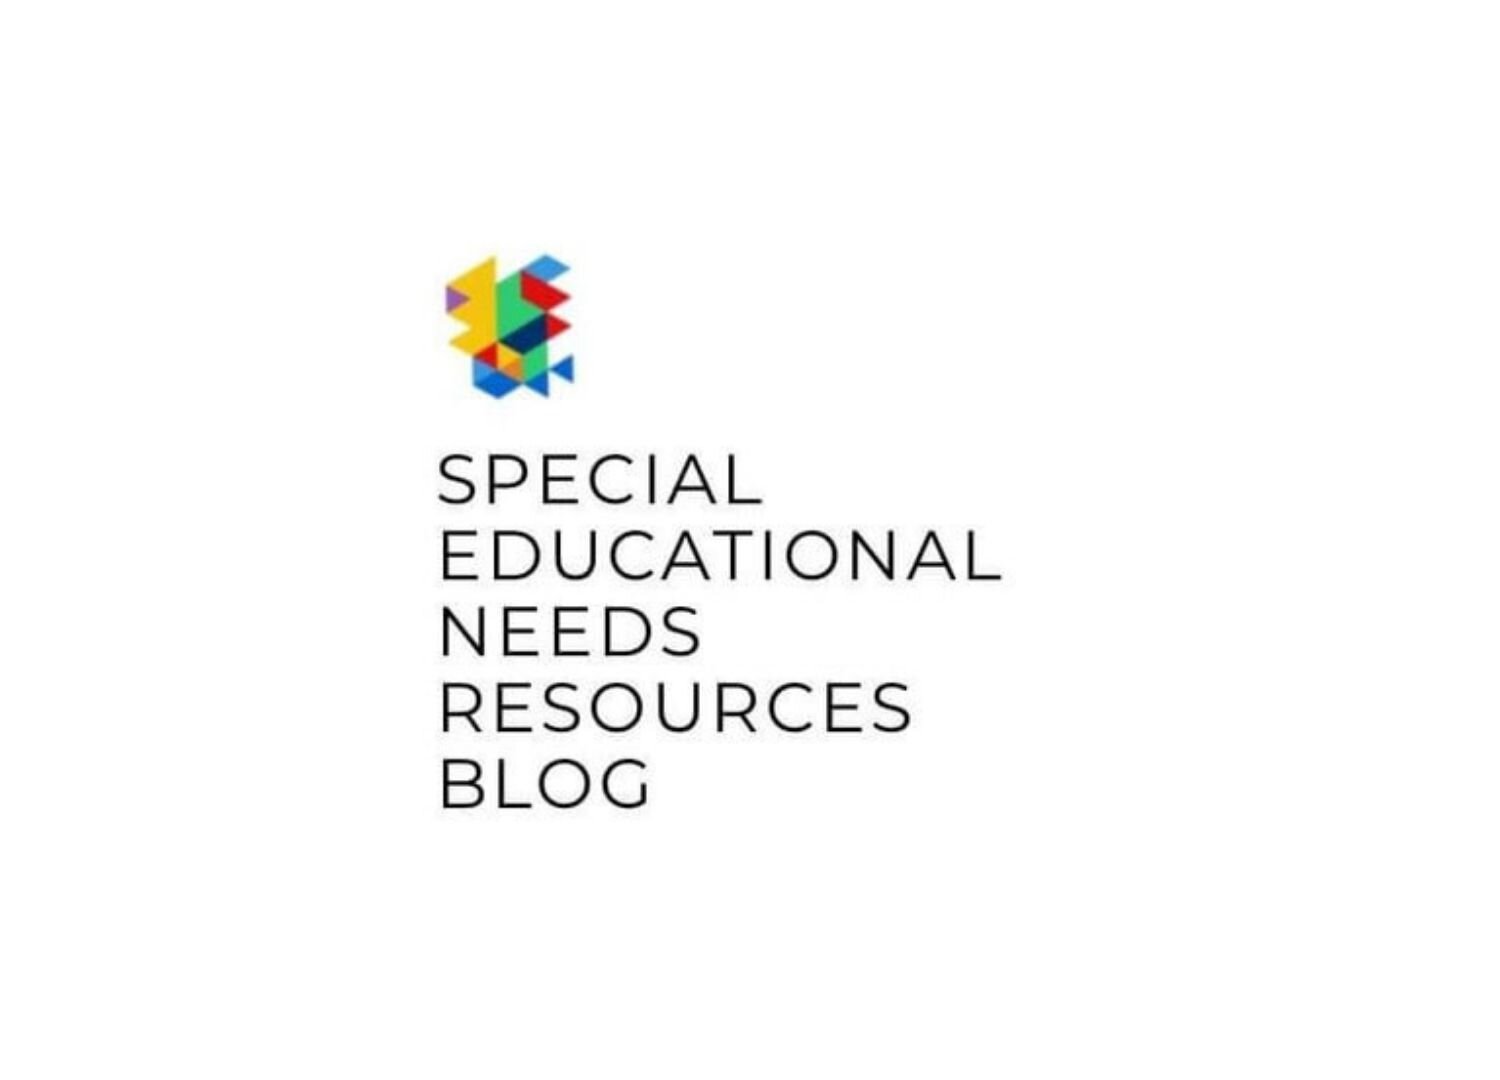 Special Educational Needs Resources Blog